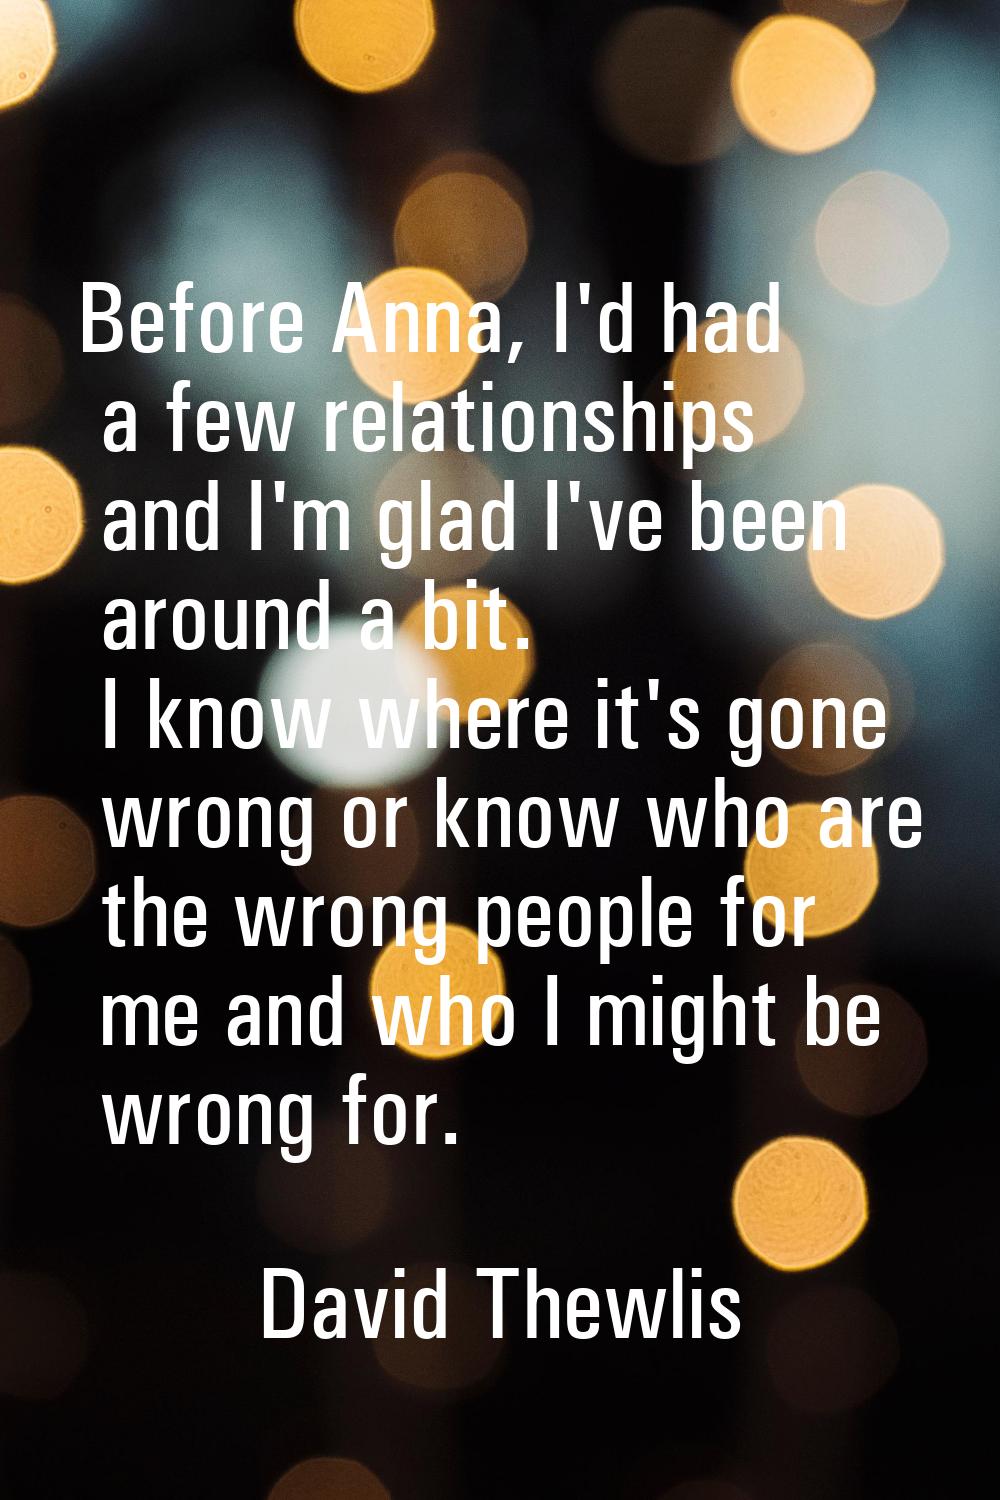 Before Anna, I'd had a few relationships and I'm glad I've been around a bit. I know where it's gon